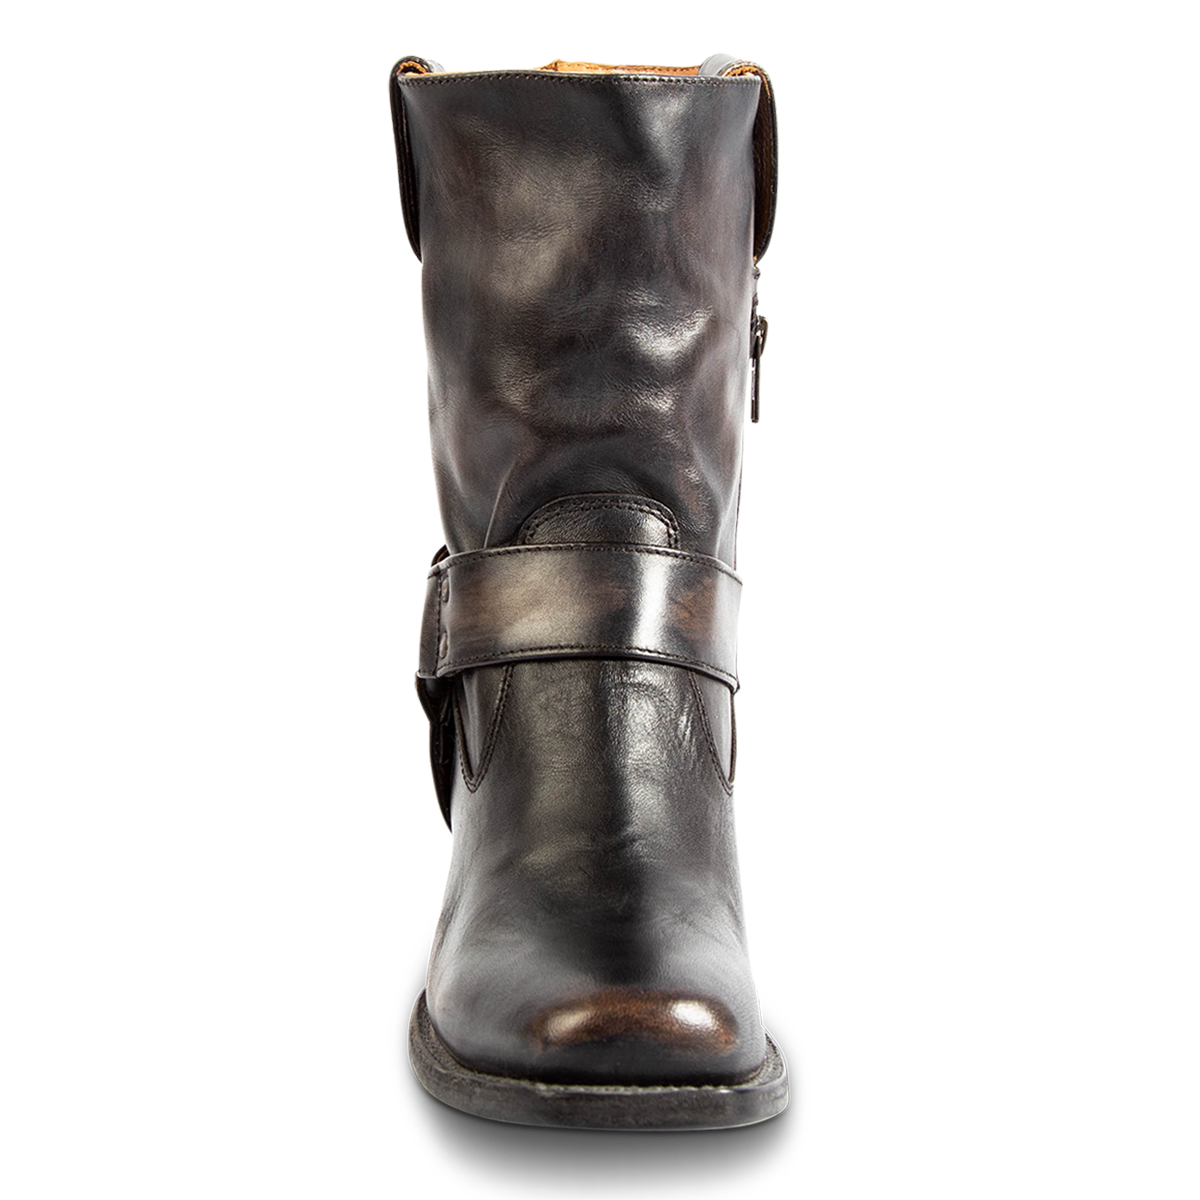 Front view showing FREEBIRD women's Darcy black leather boot with a studded ankle harness, leather pull straps and a square toe